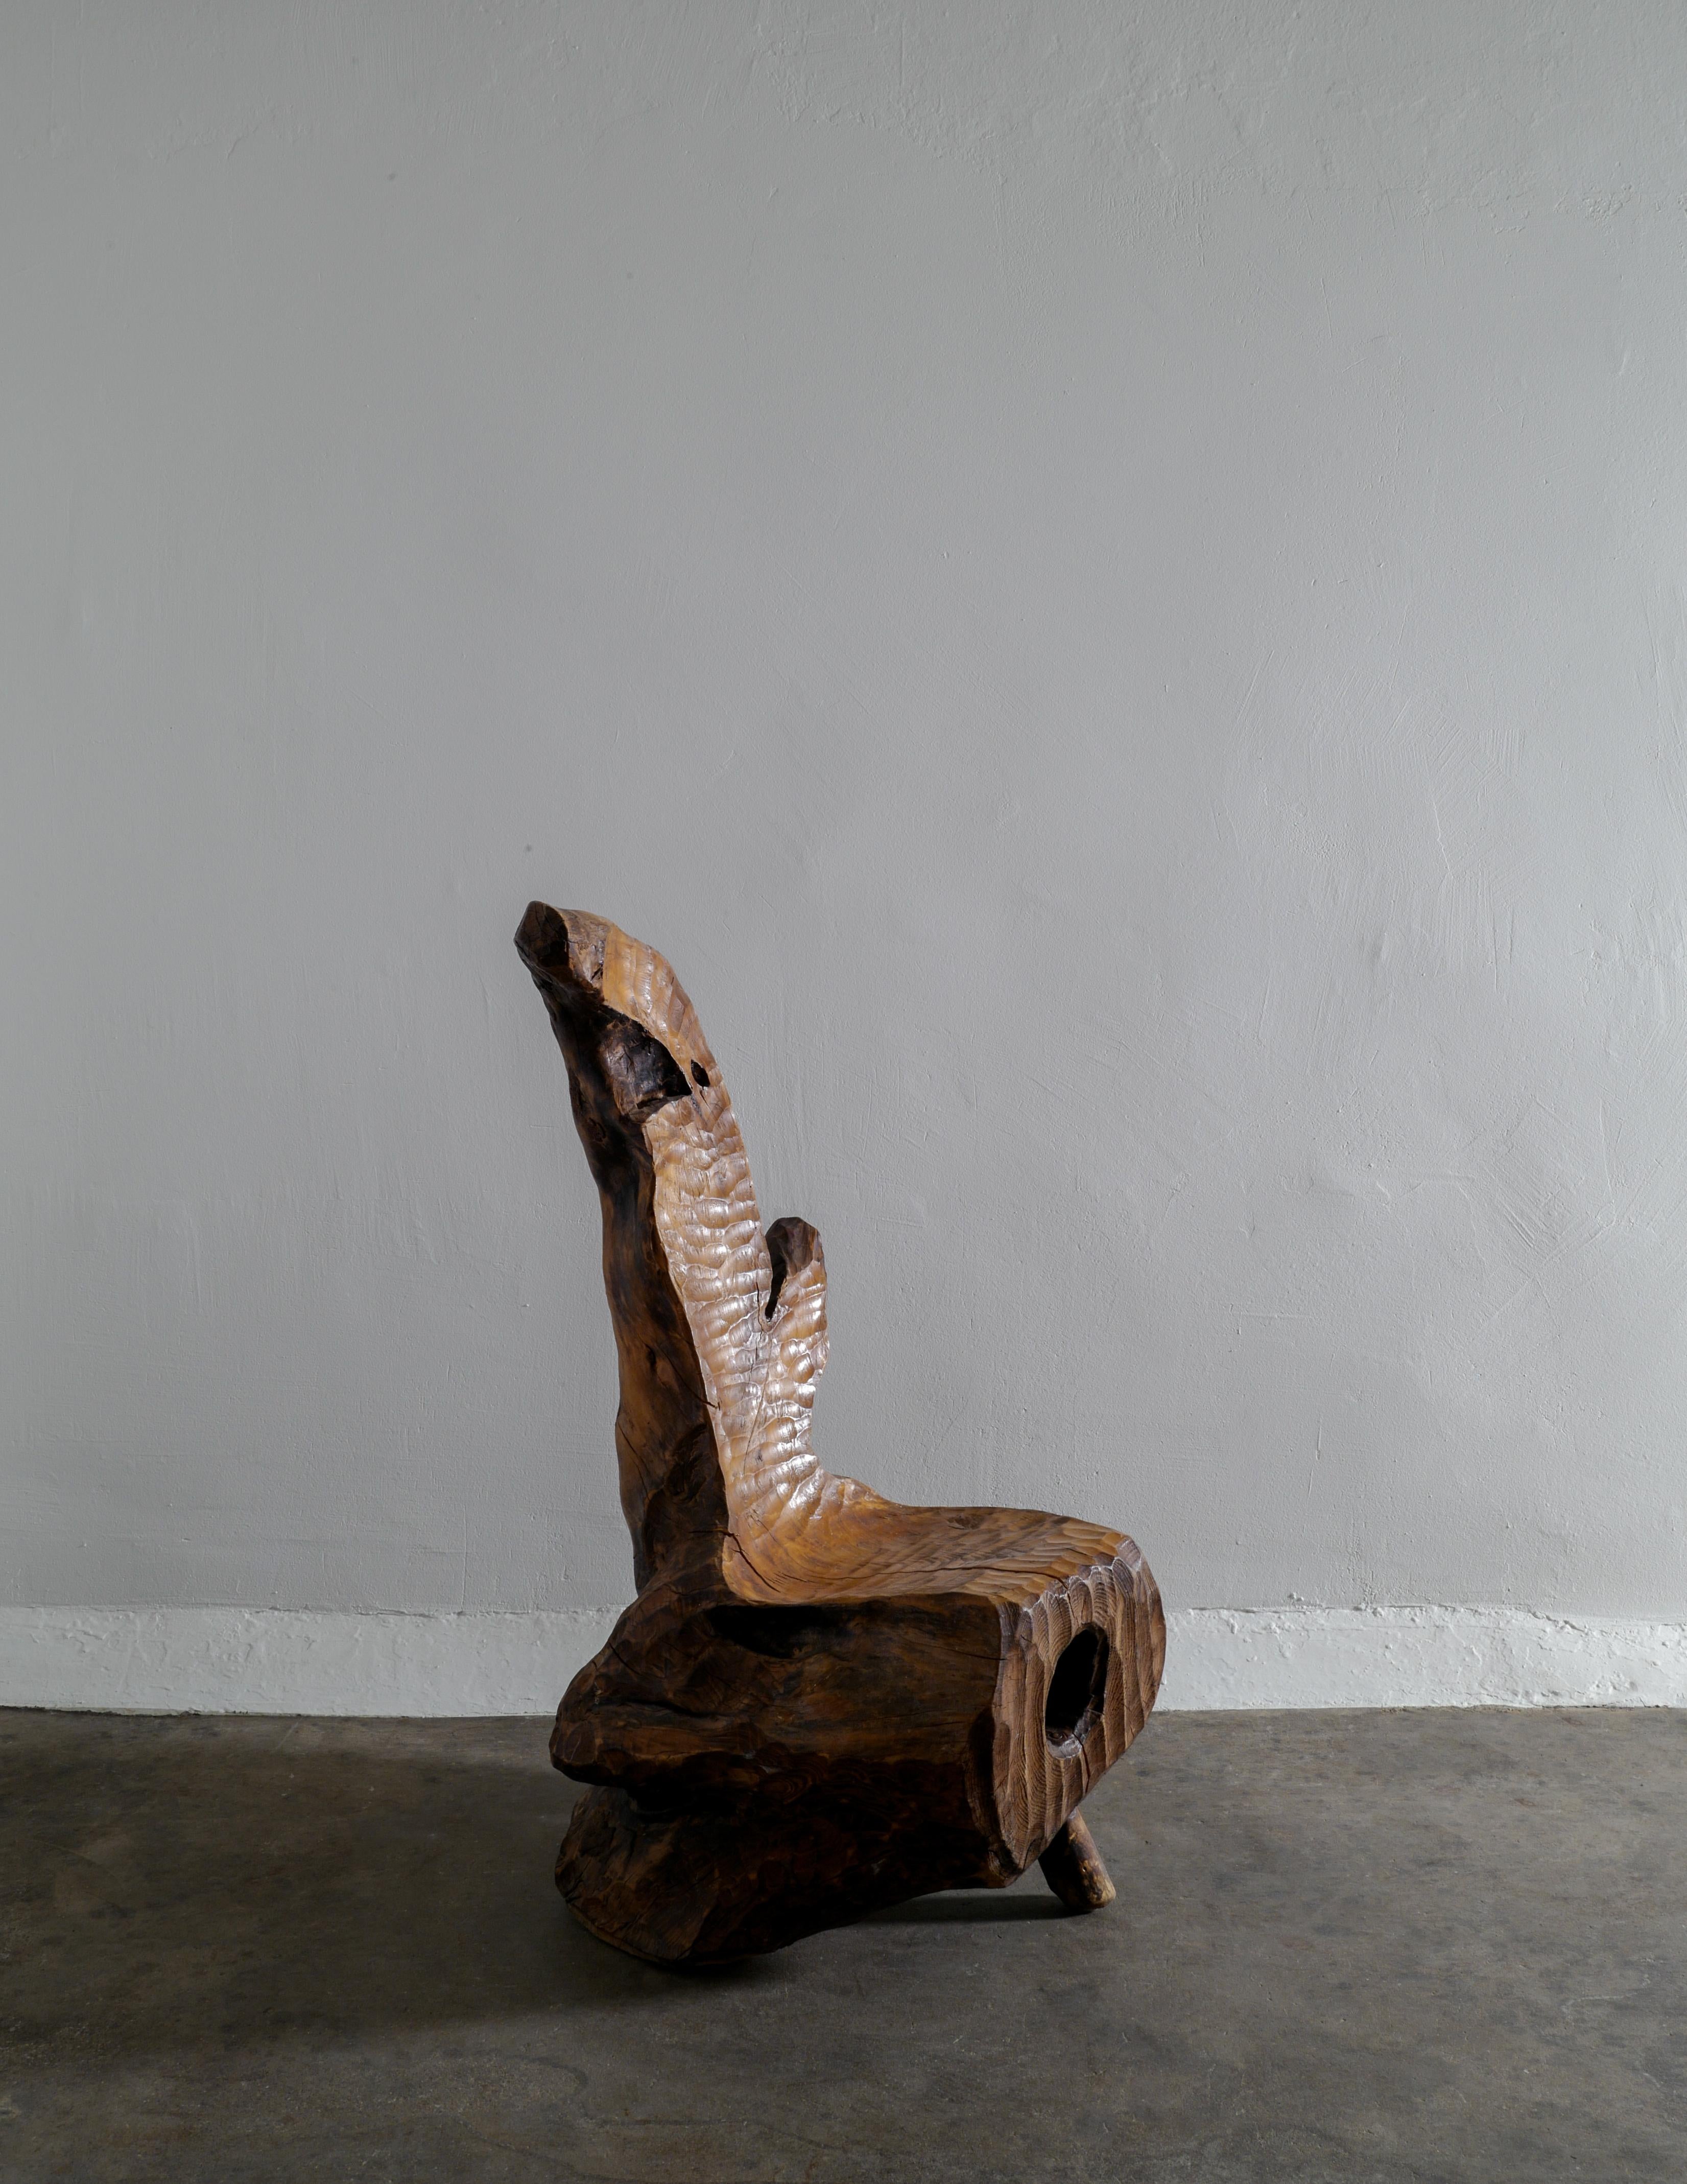 Mid-Century Modern Swedish Hand Made & Sculptural Wooden Chair in a Primitive and Wabi Sabi Style